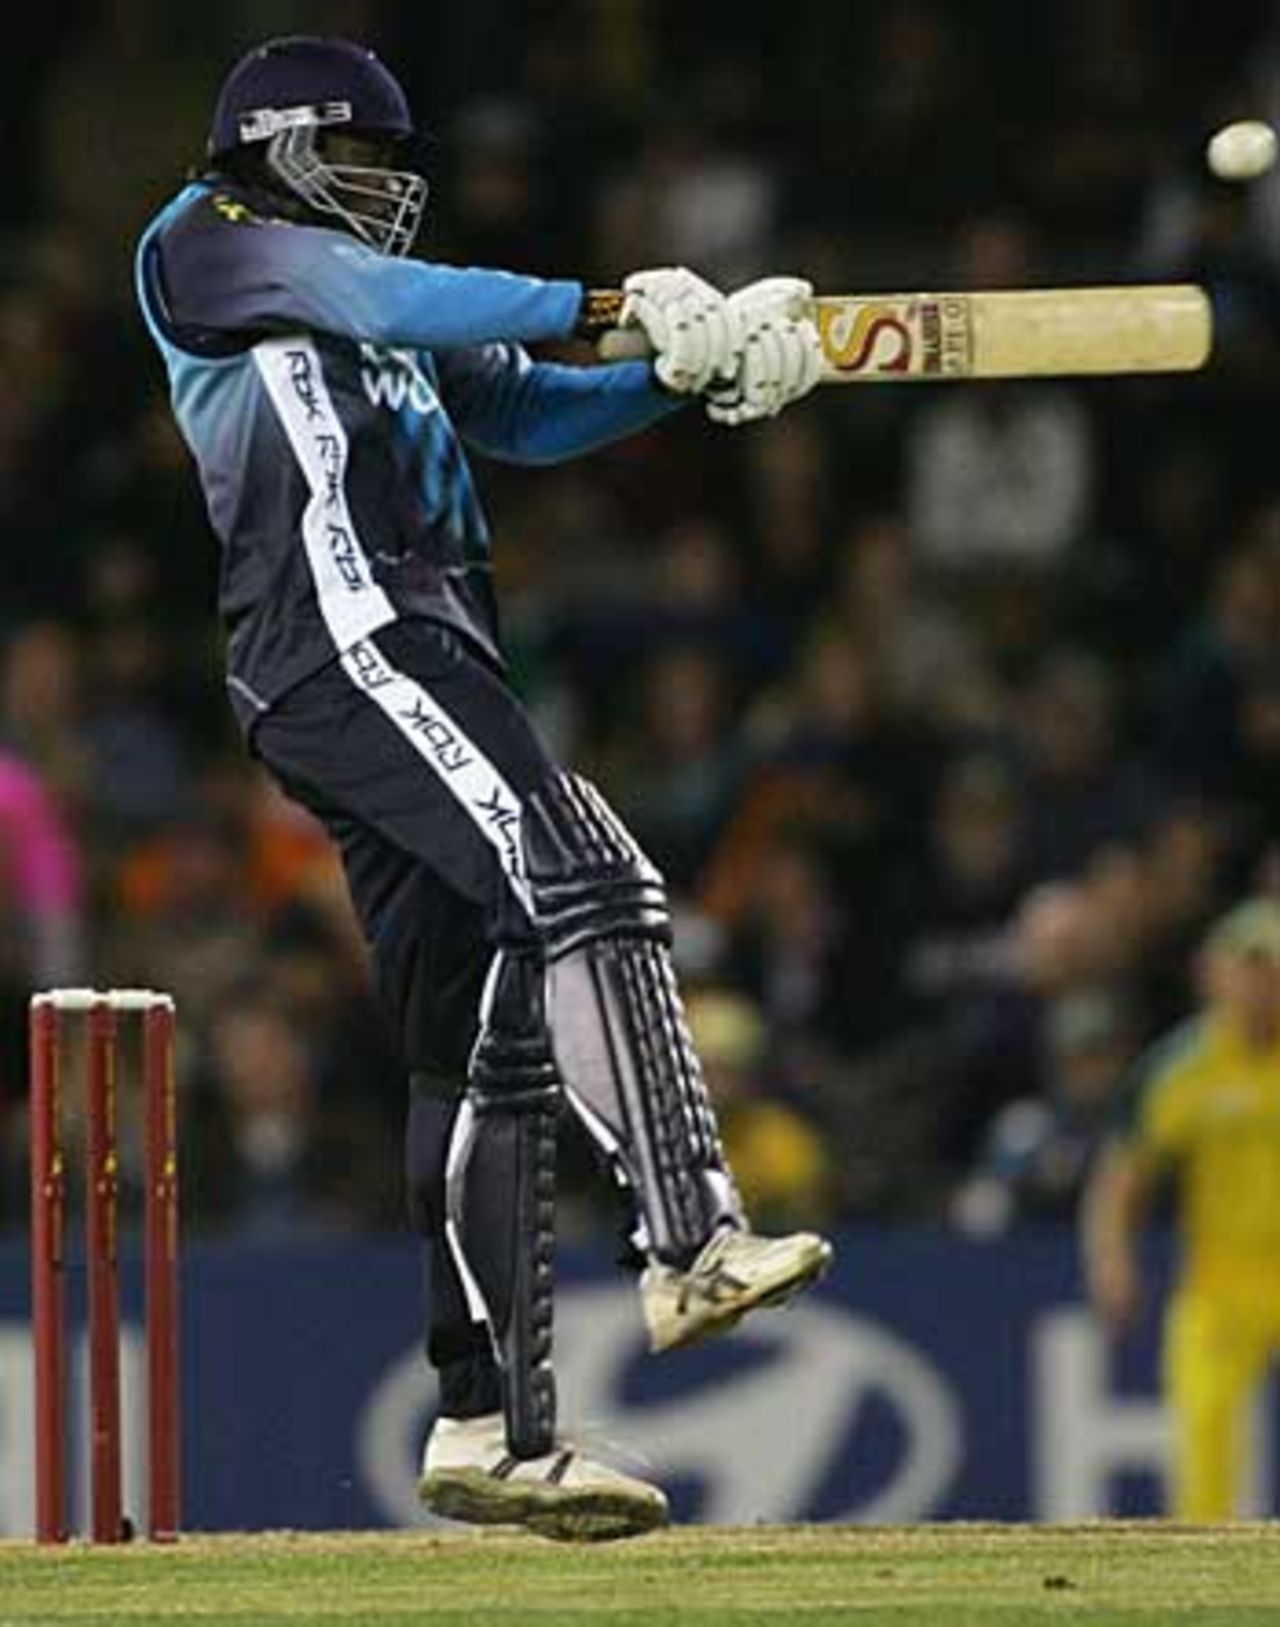 Chris Gayle cuts during his blistering innings of 54, Australia v World XI, 2nd ODI, Super Series, Melbourne, October 7, 2005